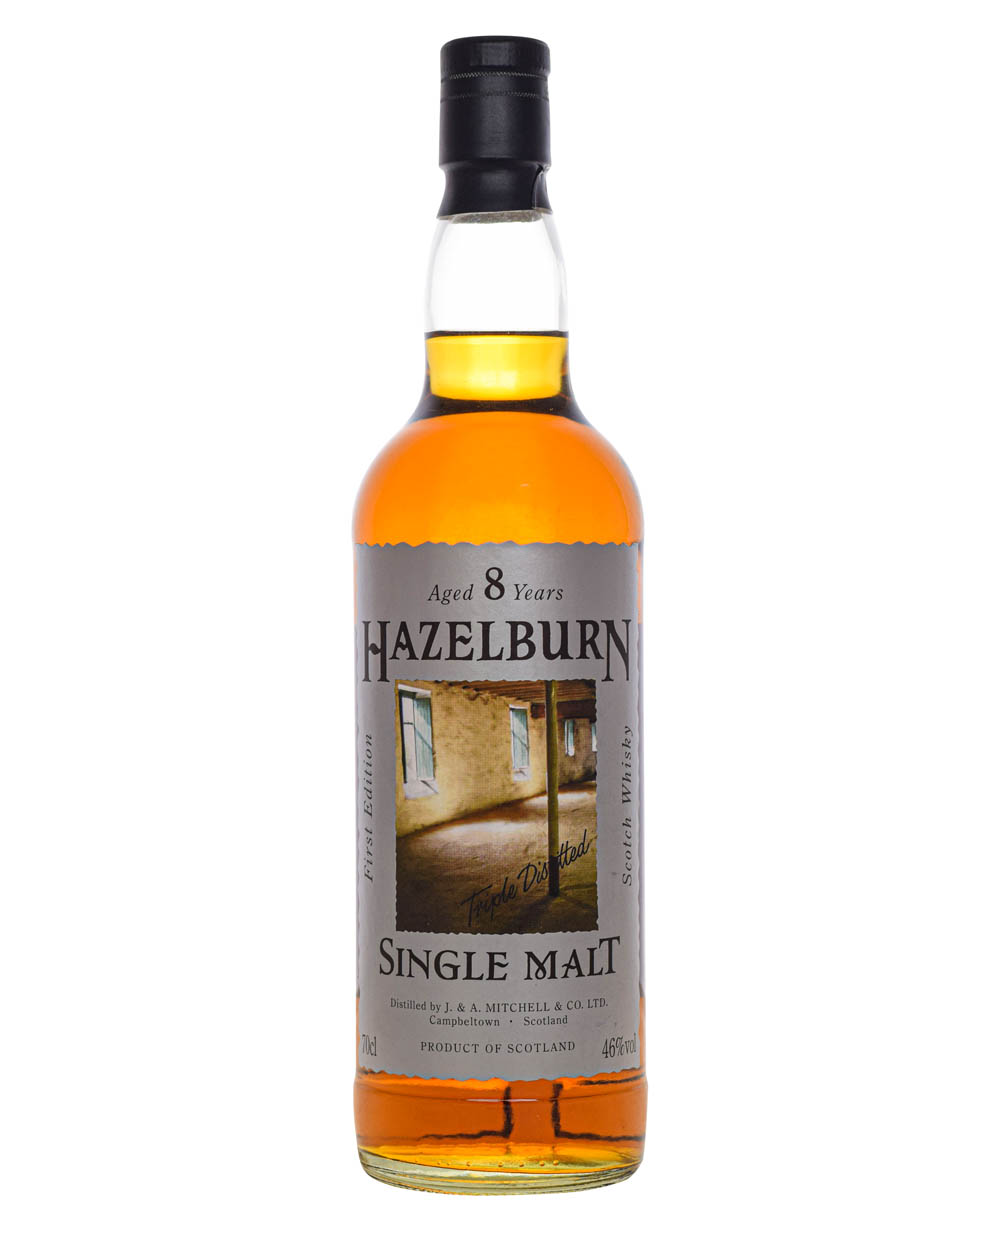 Hazelburn 8 Years Old First Edition Barrel Maltings Edition Musthave Malts MHM